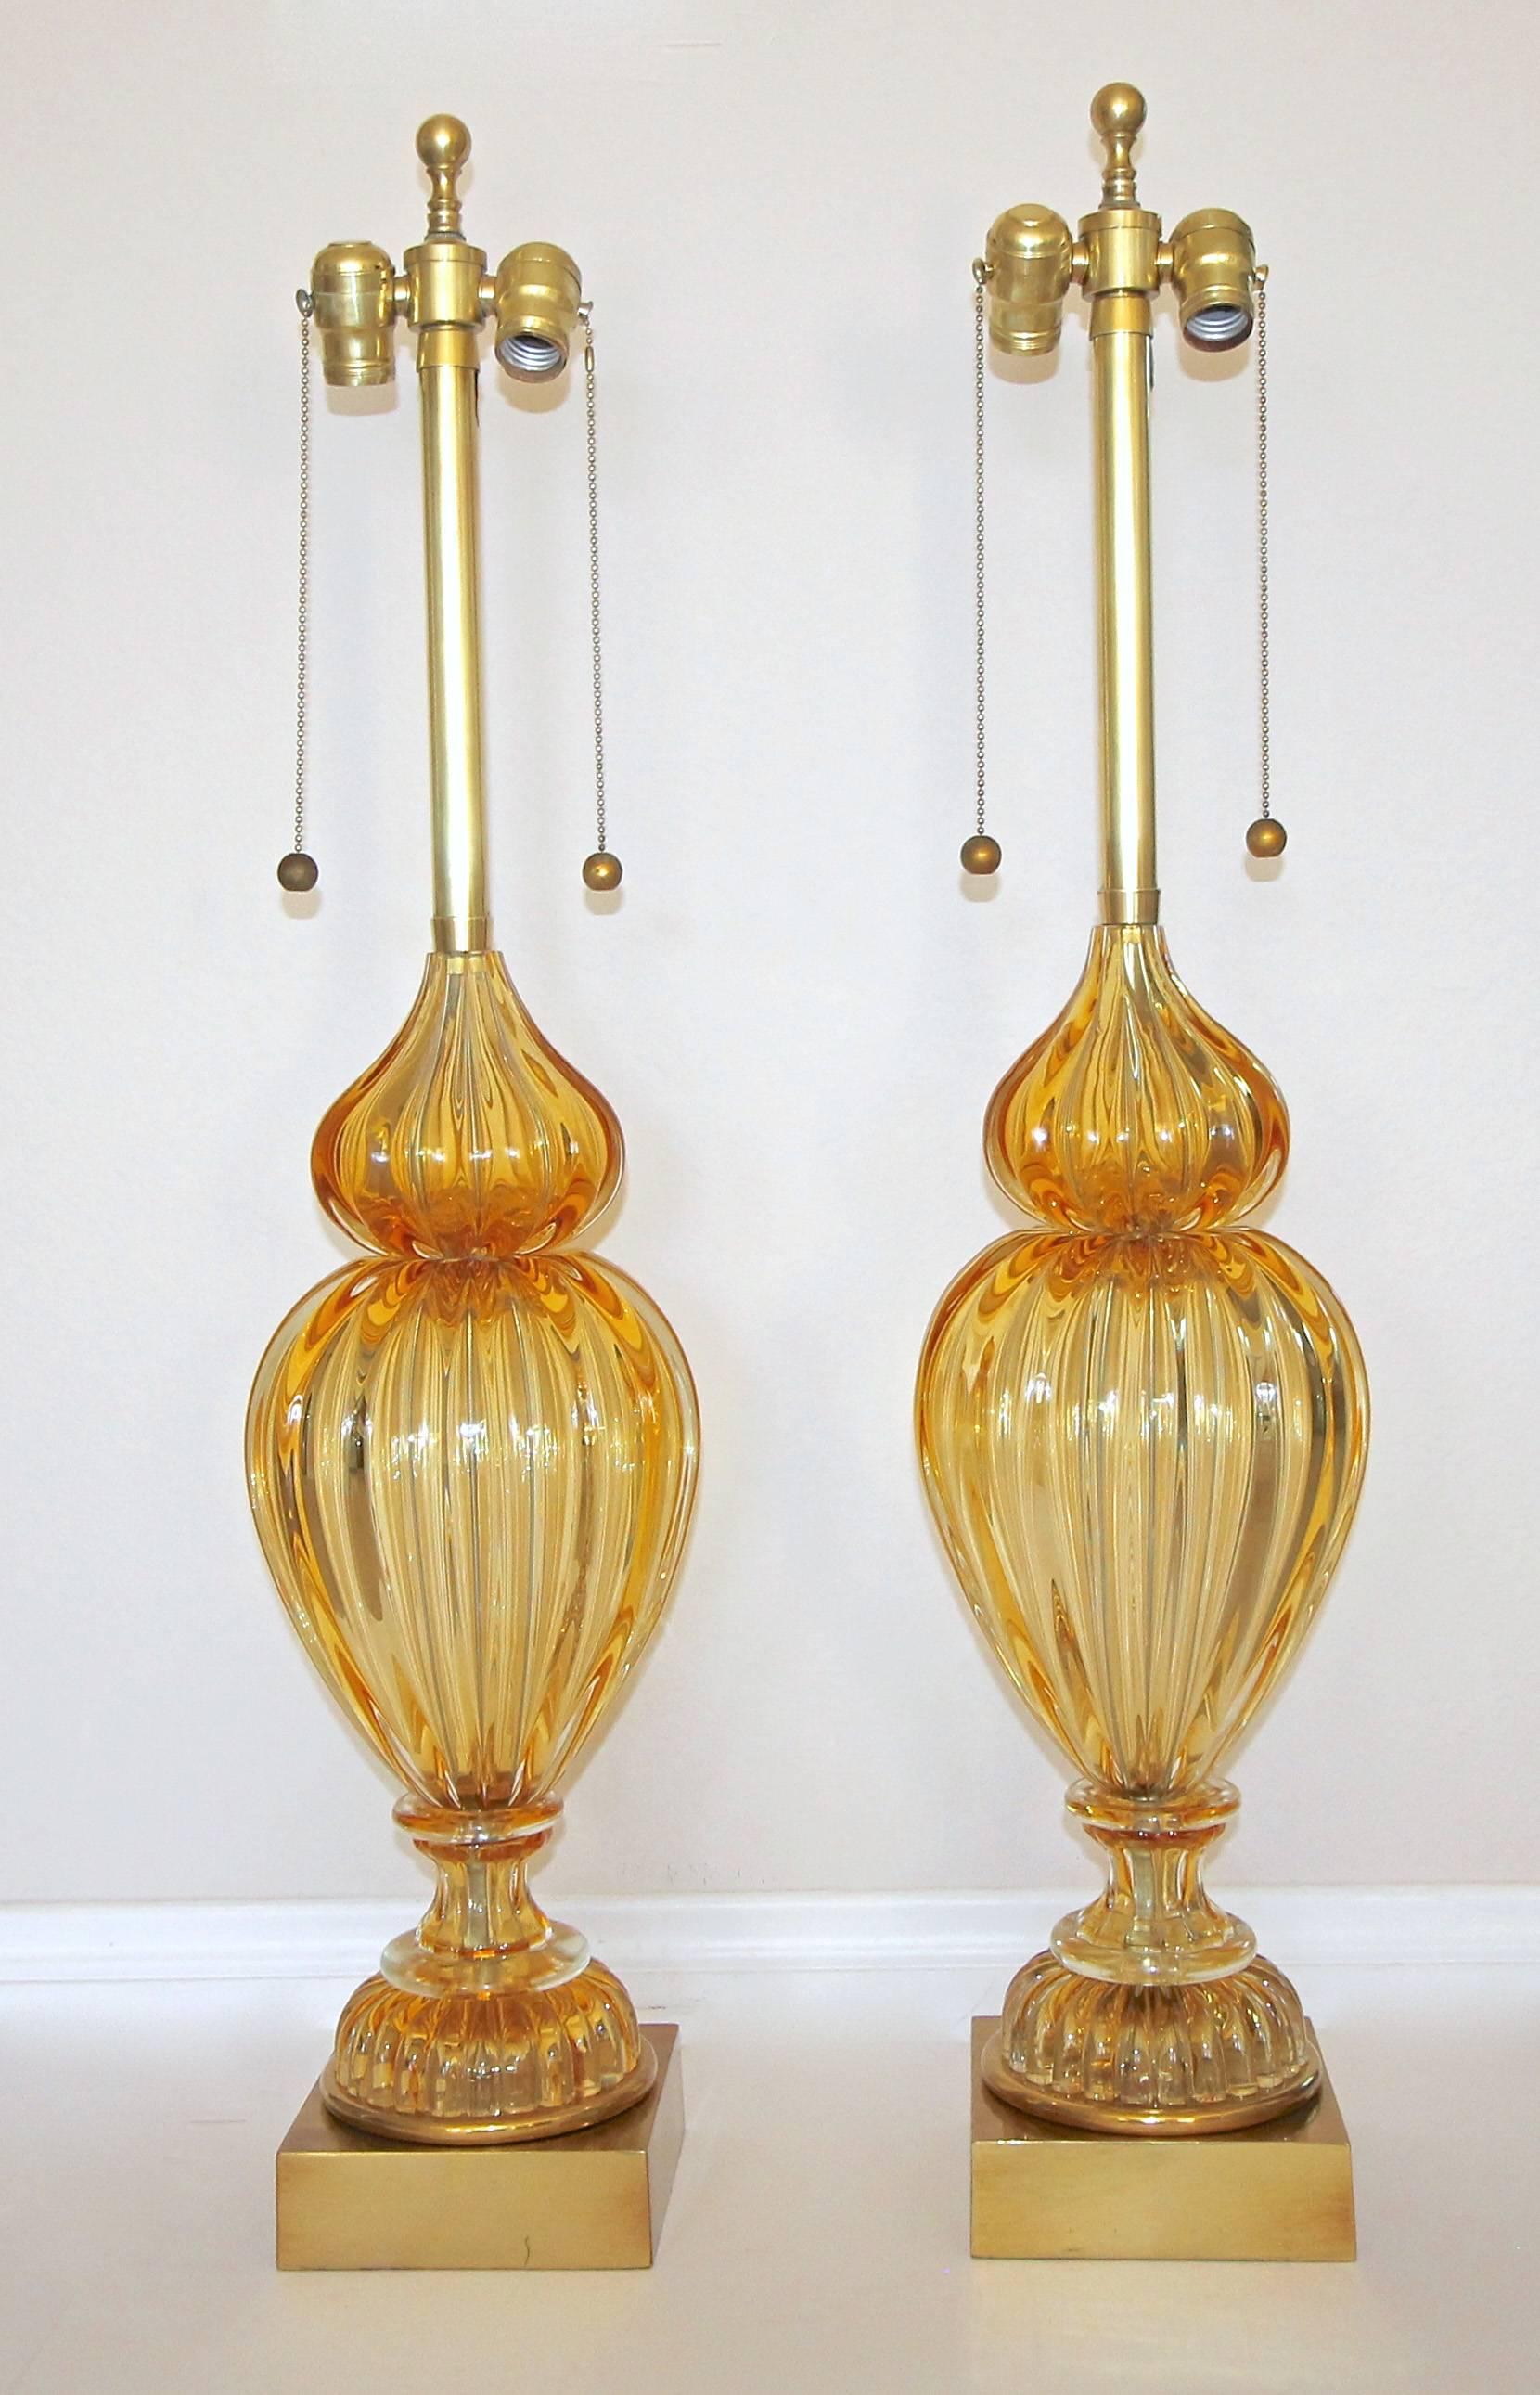 Pair of large Seguso Italian Murano handblown amber ribbed glass table lamps by Marbro. Glass has a rich golden amber color, each resting on original gilt metal bases. Original solid brass double cluster sockets and fittings, newly wired. Retains